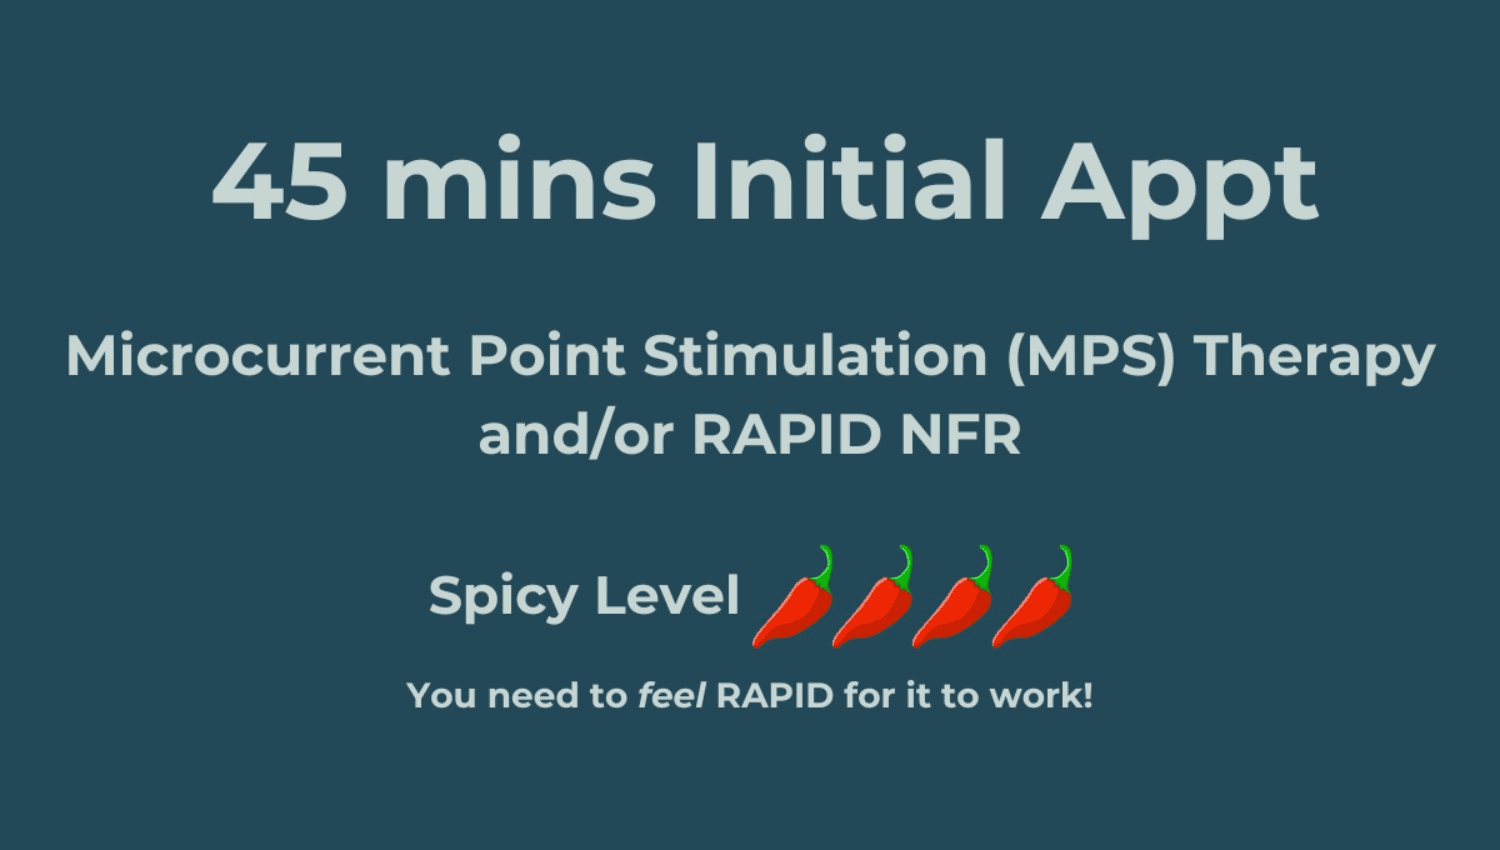 Image for 45 mins INITIAL appointment for Microcurrent Point Stimulation (MPS) Therapy and/or RAPID NFR